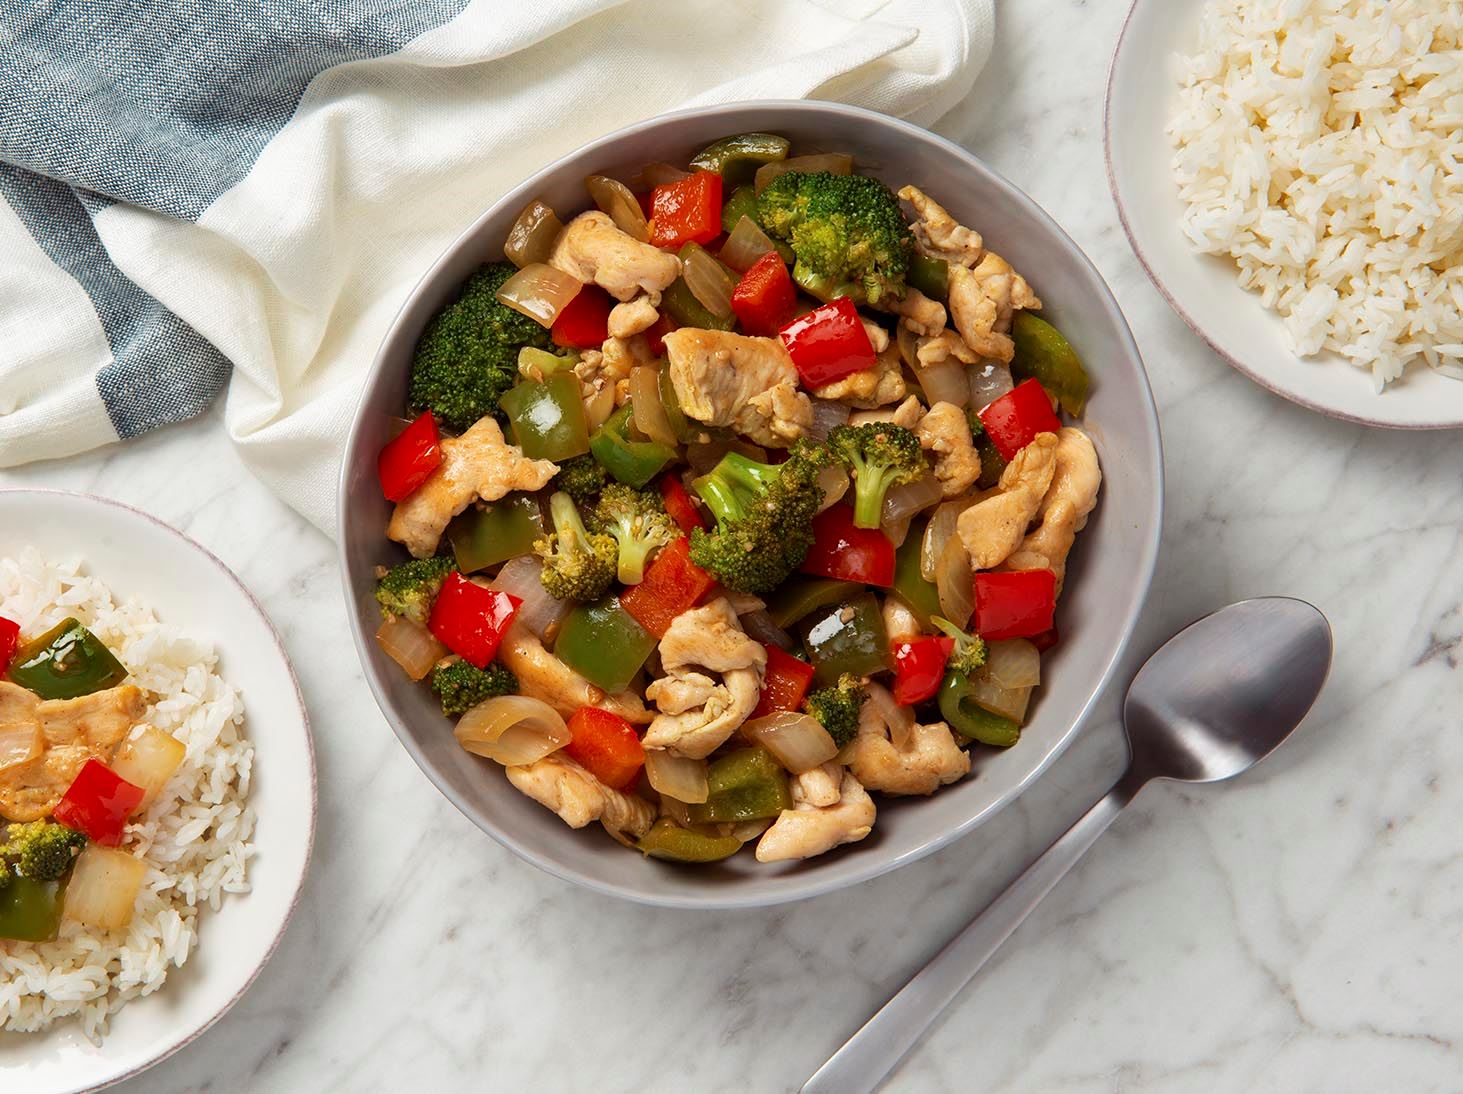 Stir-Fried Mojo Chicken, Peppers and Broccoli